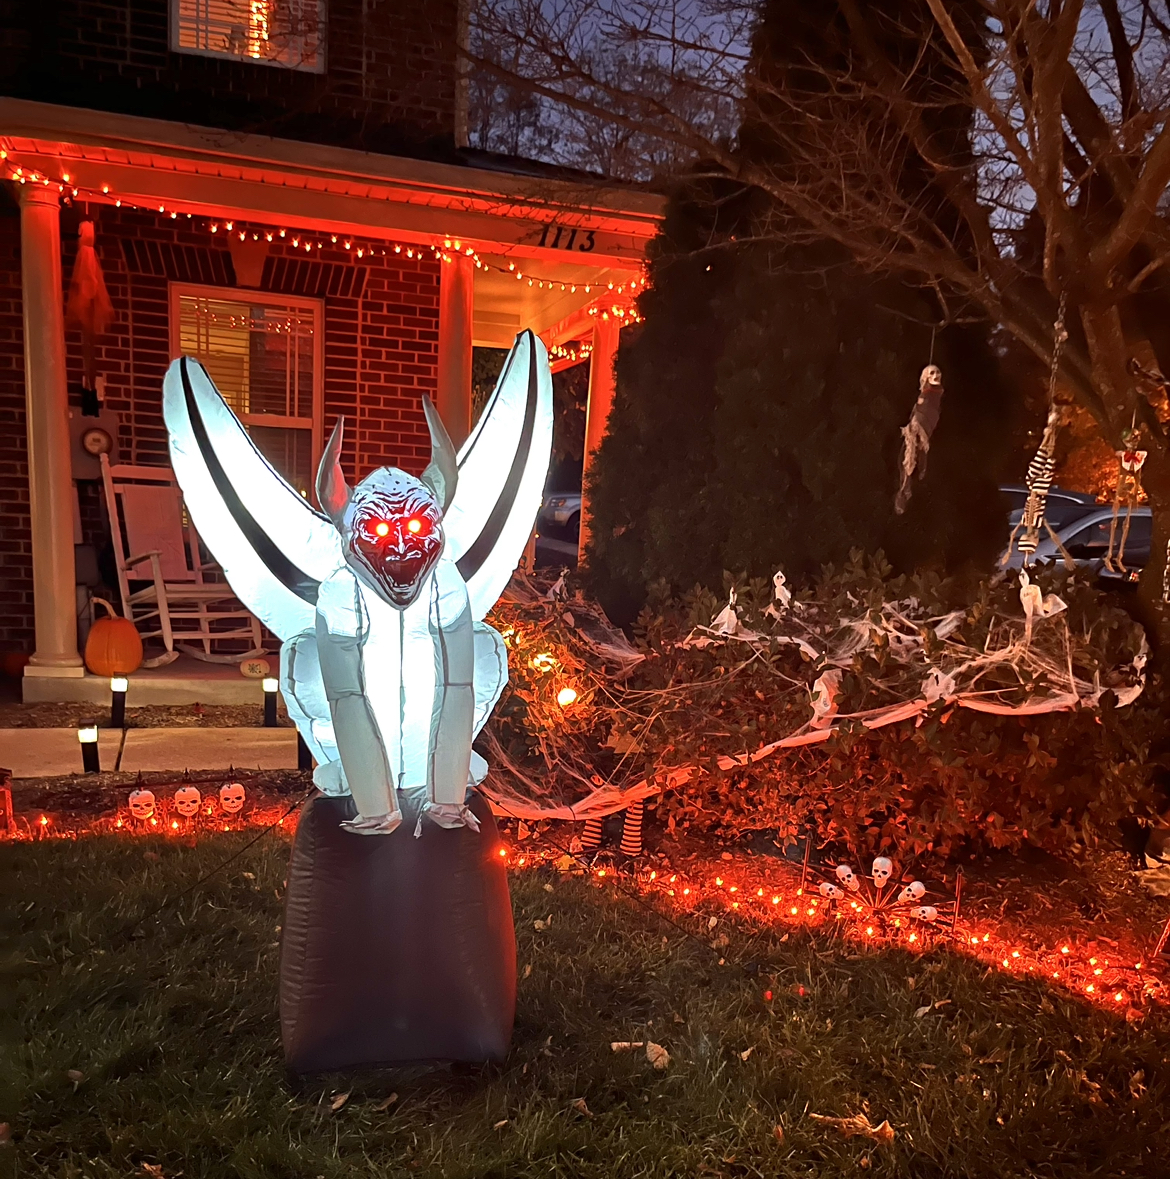 A spine-chilling blow-up gargoyle is displayed in front of this house. This decoration is said to have “spooked most neighbors when they walked by.